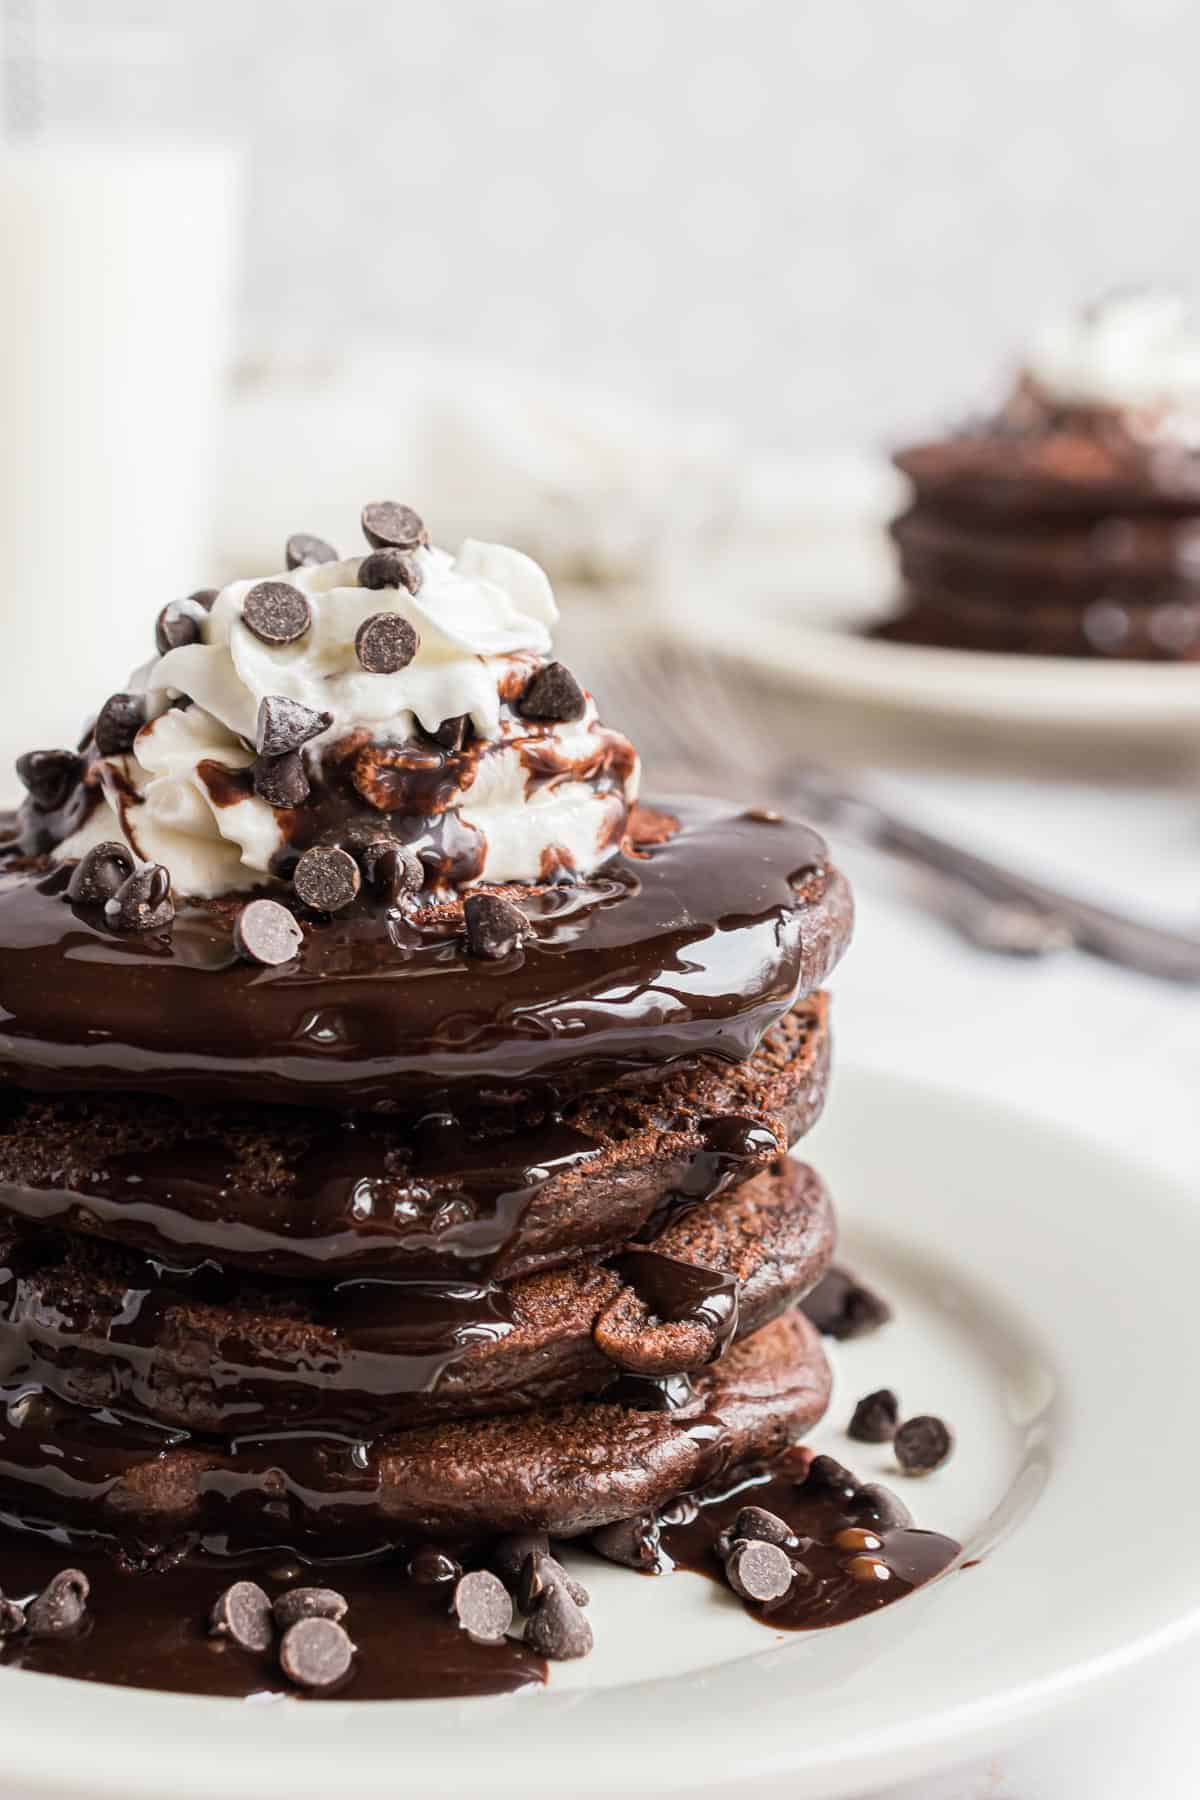 Stack of chocolate pancakes topped with whipped cream, chocolate chips, and chocolate syrup.